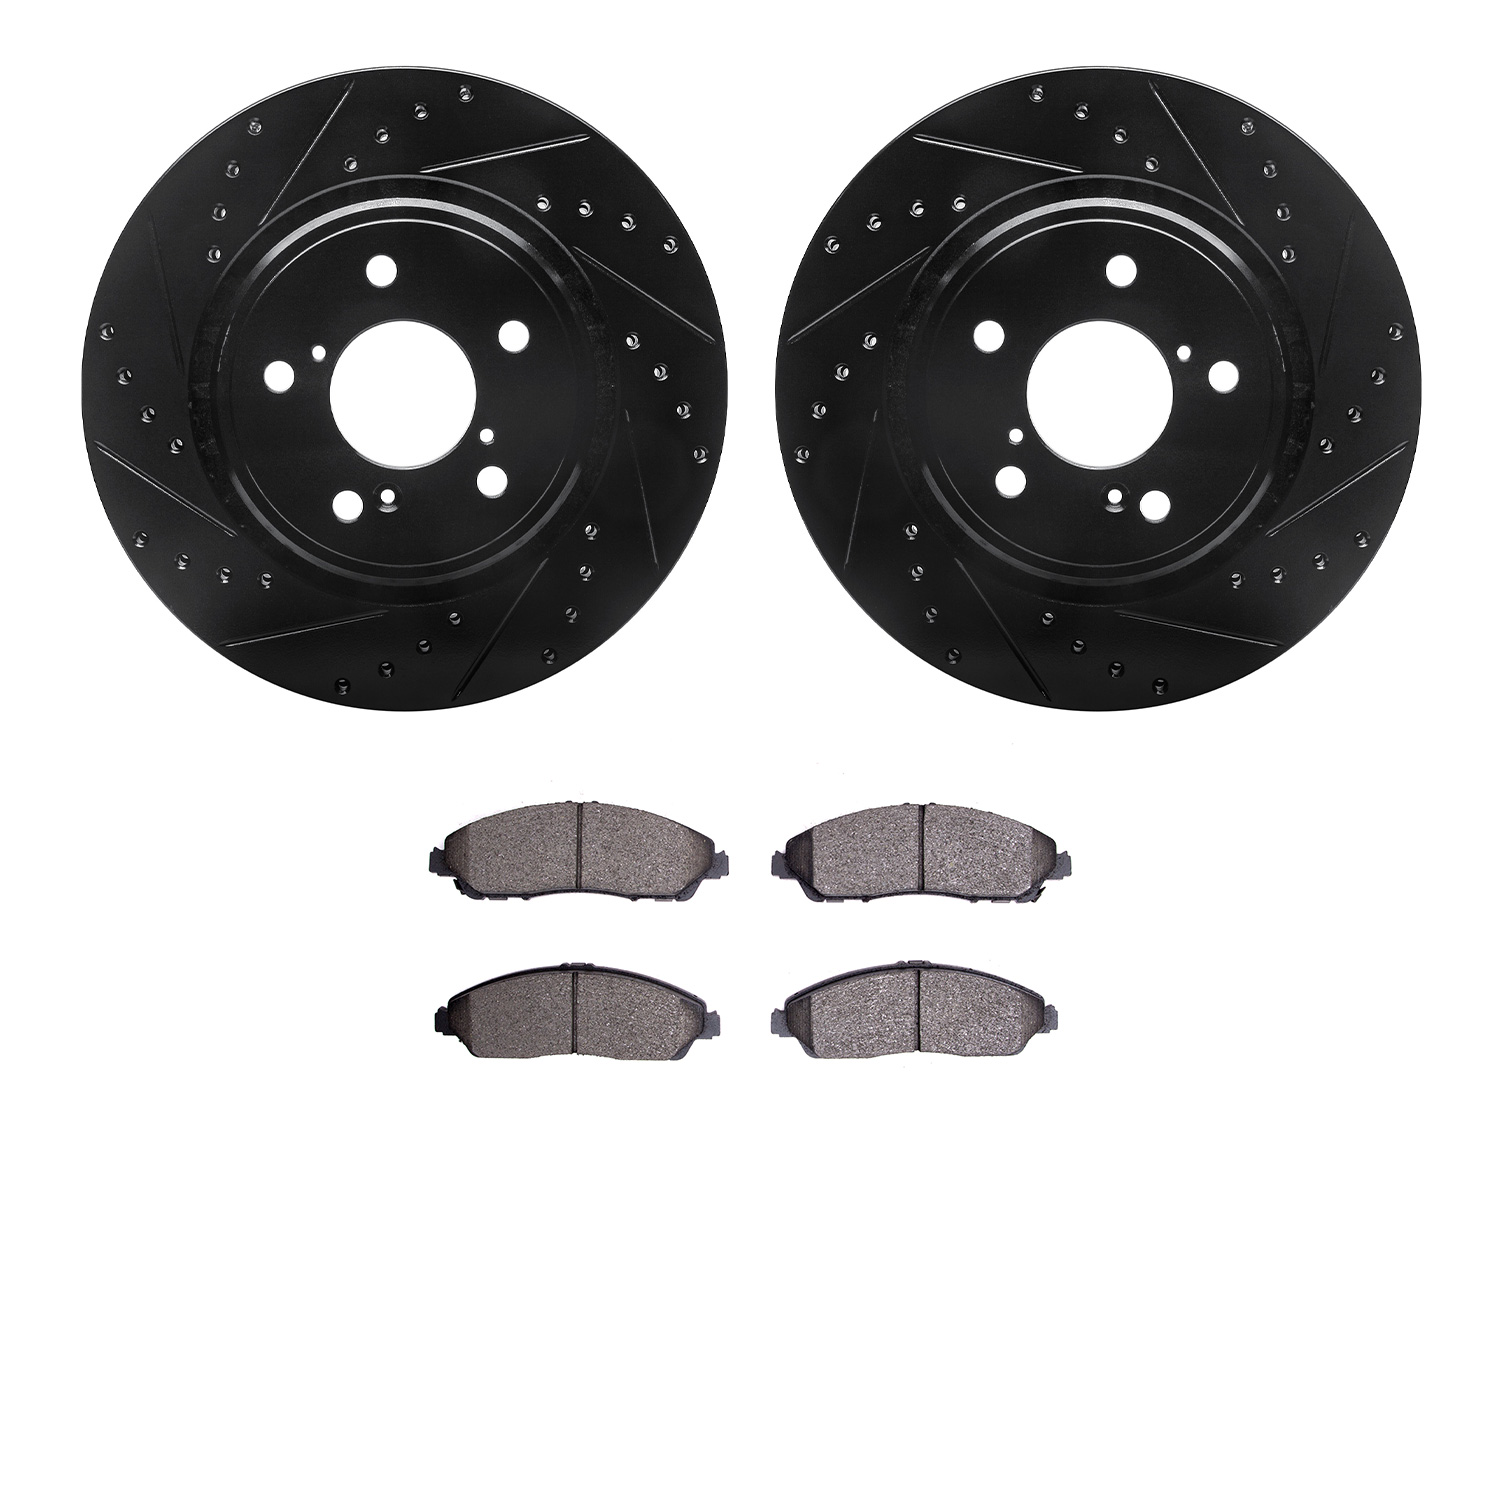 8302-59101 Drilled/Slotted Brake Rotors with 3000-Series Ceramic Brake Pads Kit [Black], Fits Select Acura/Honda, Position: Fron